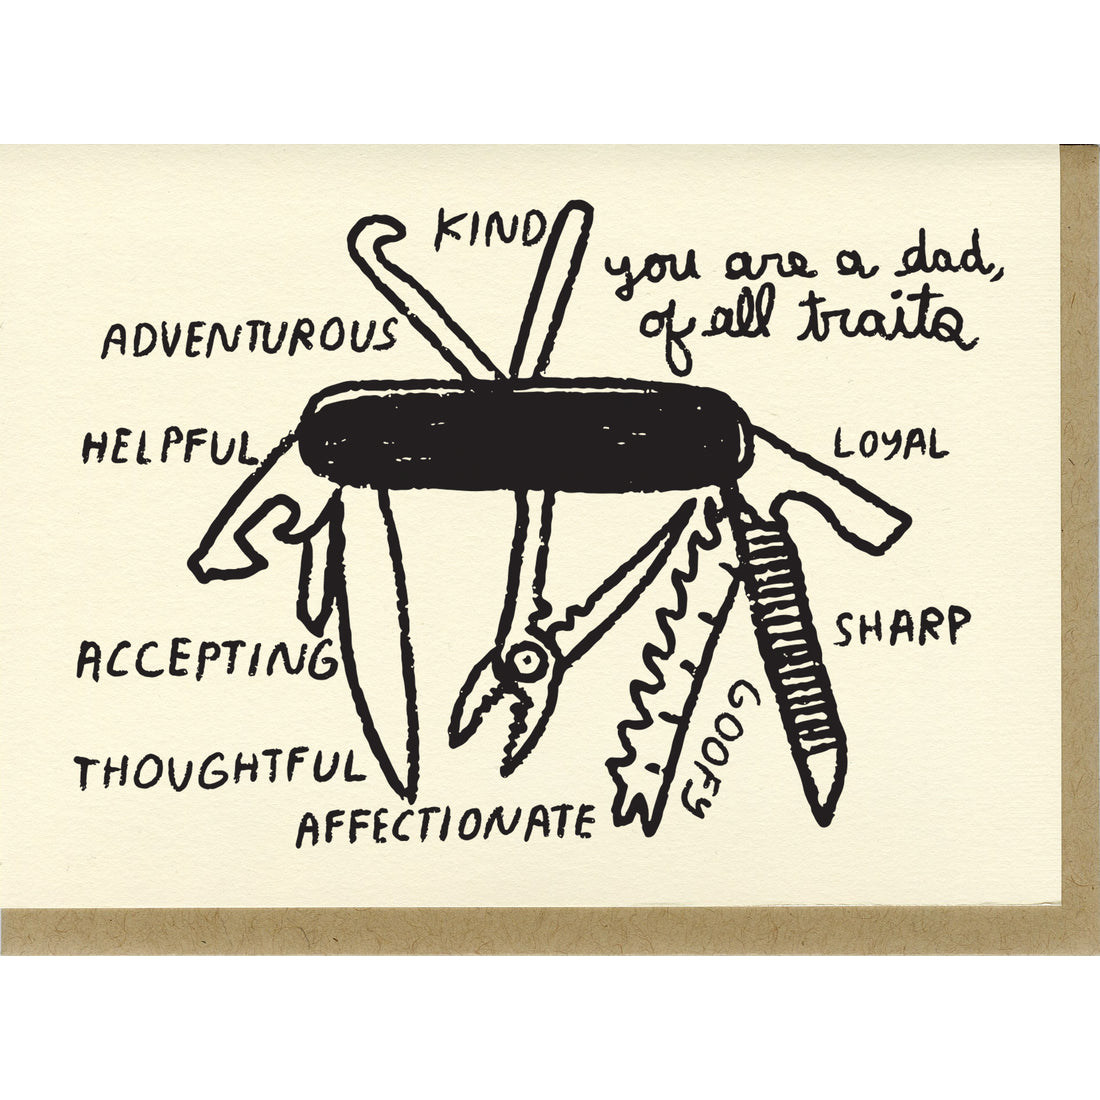 Dad of All Traits Greeting Card